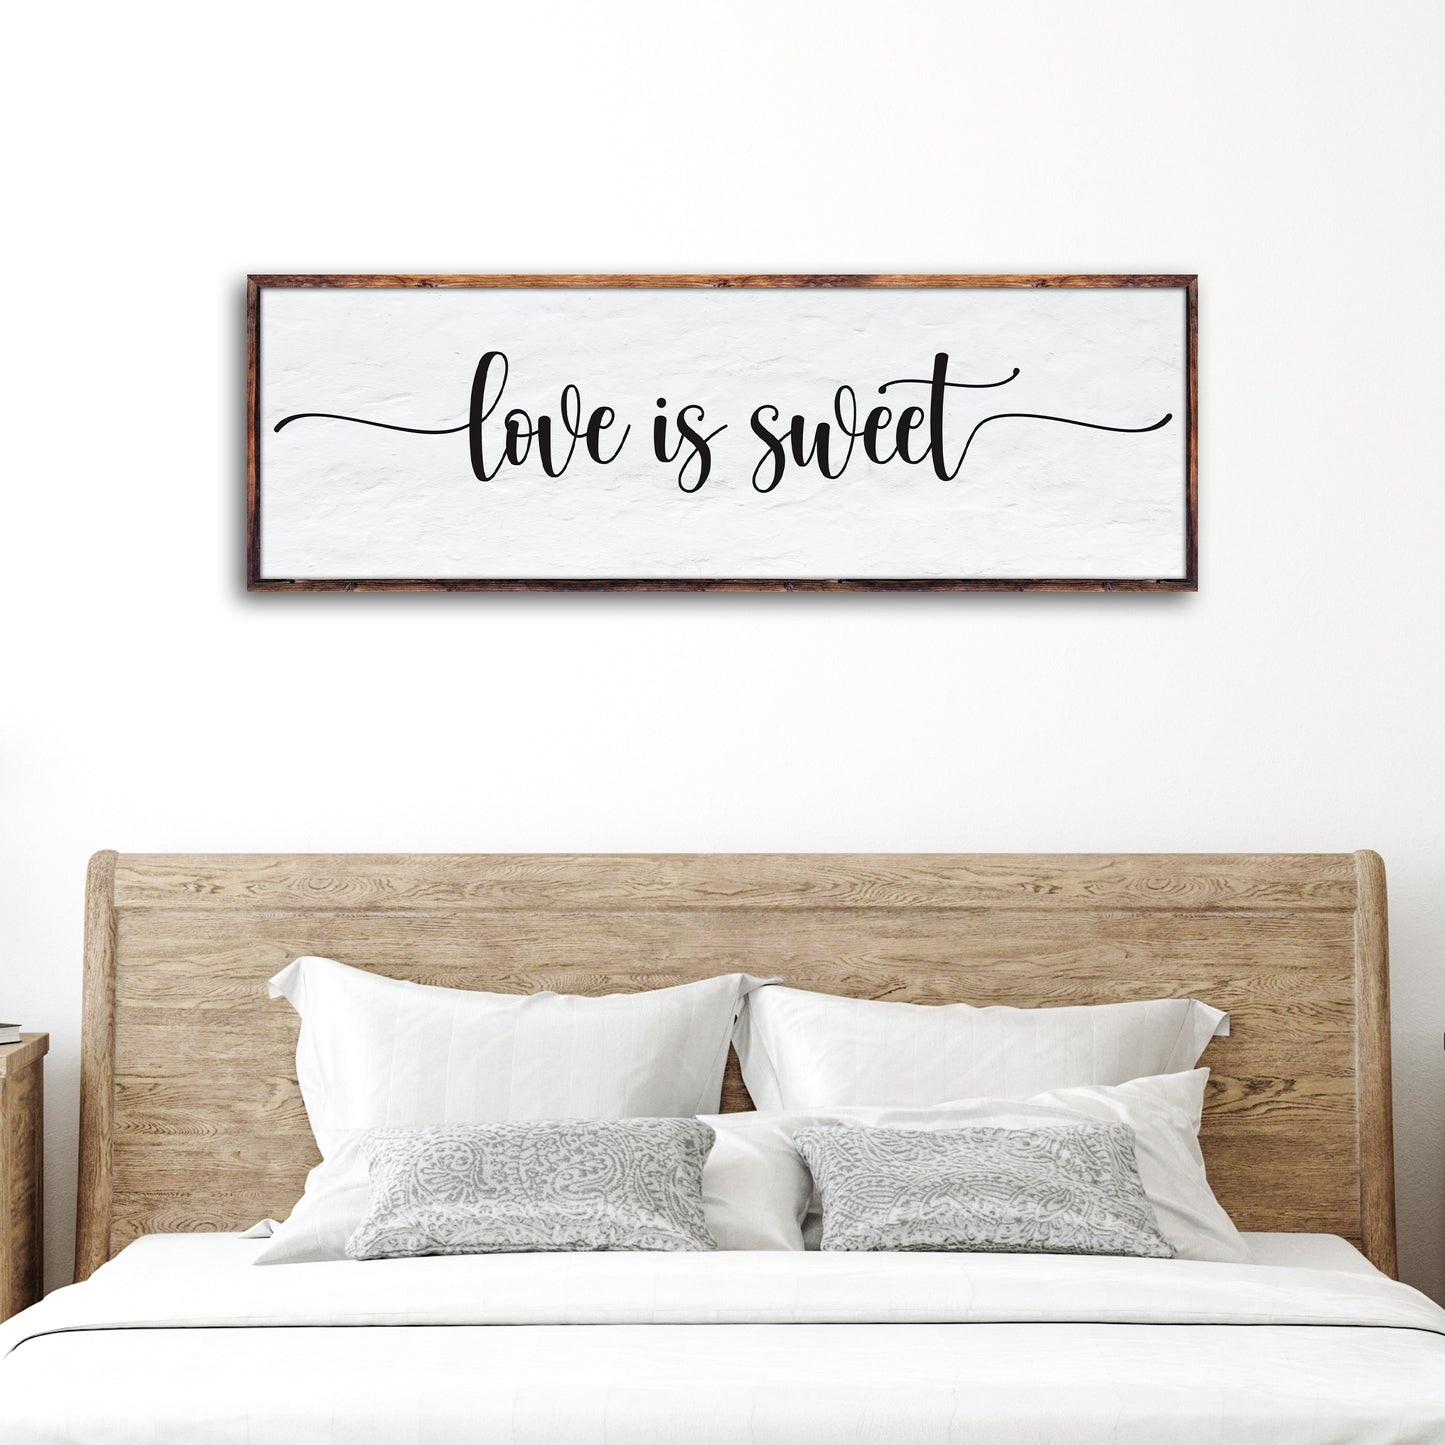 Love Is Sweet Sign - Image by Tailored Canvases